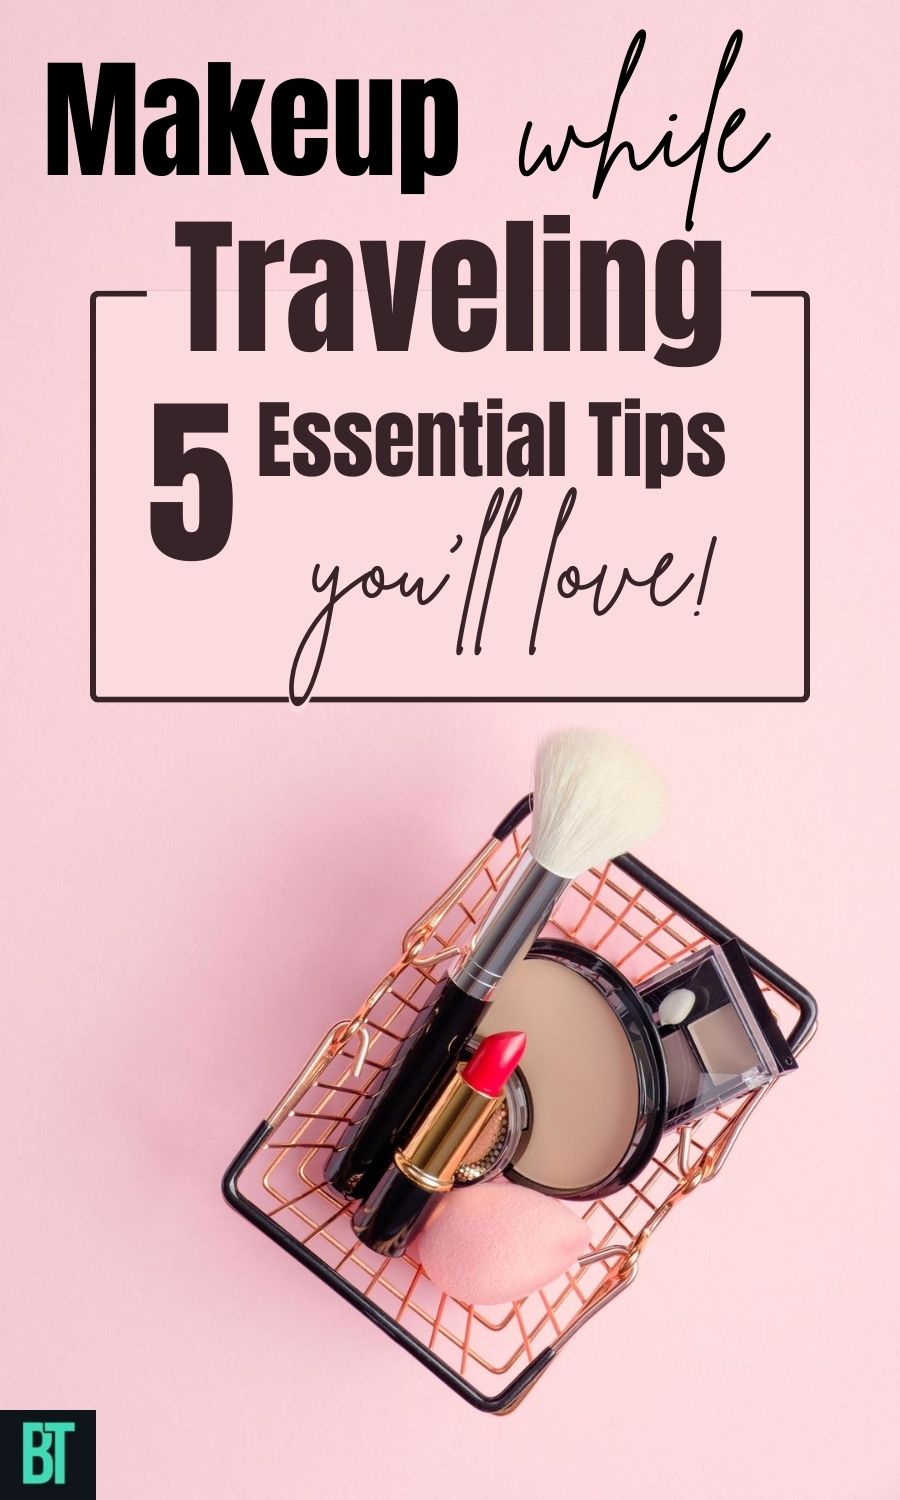 Makeup while traveling: 5 essential tips